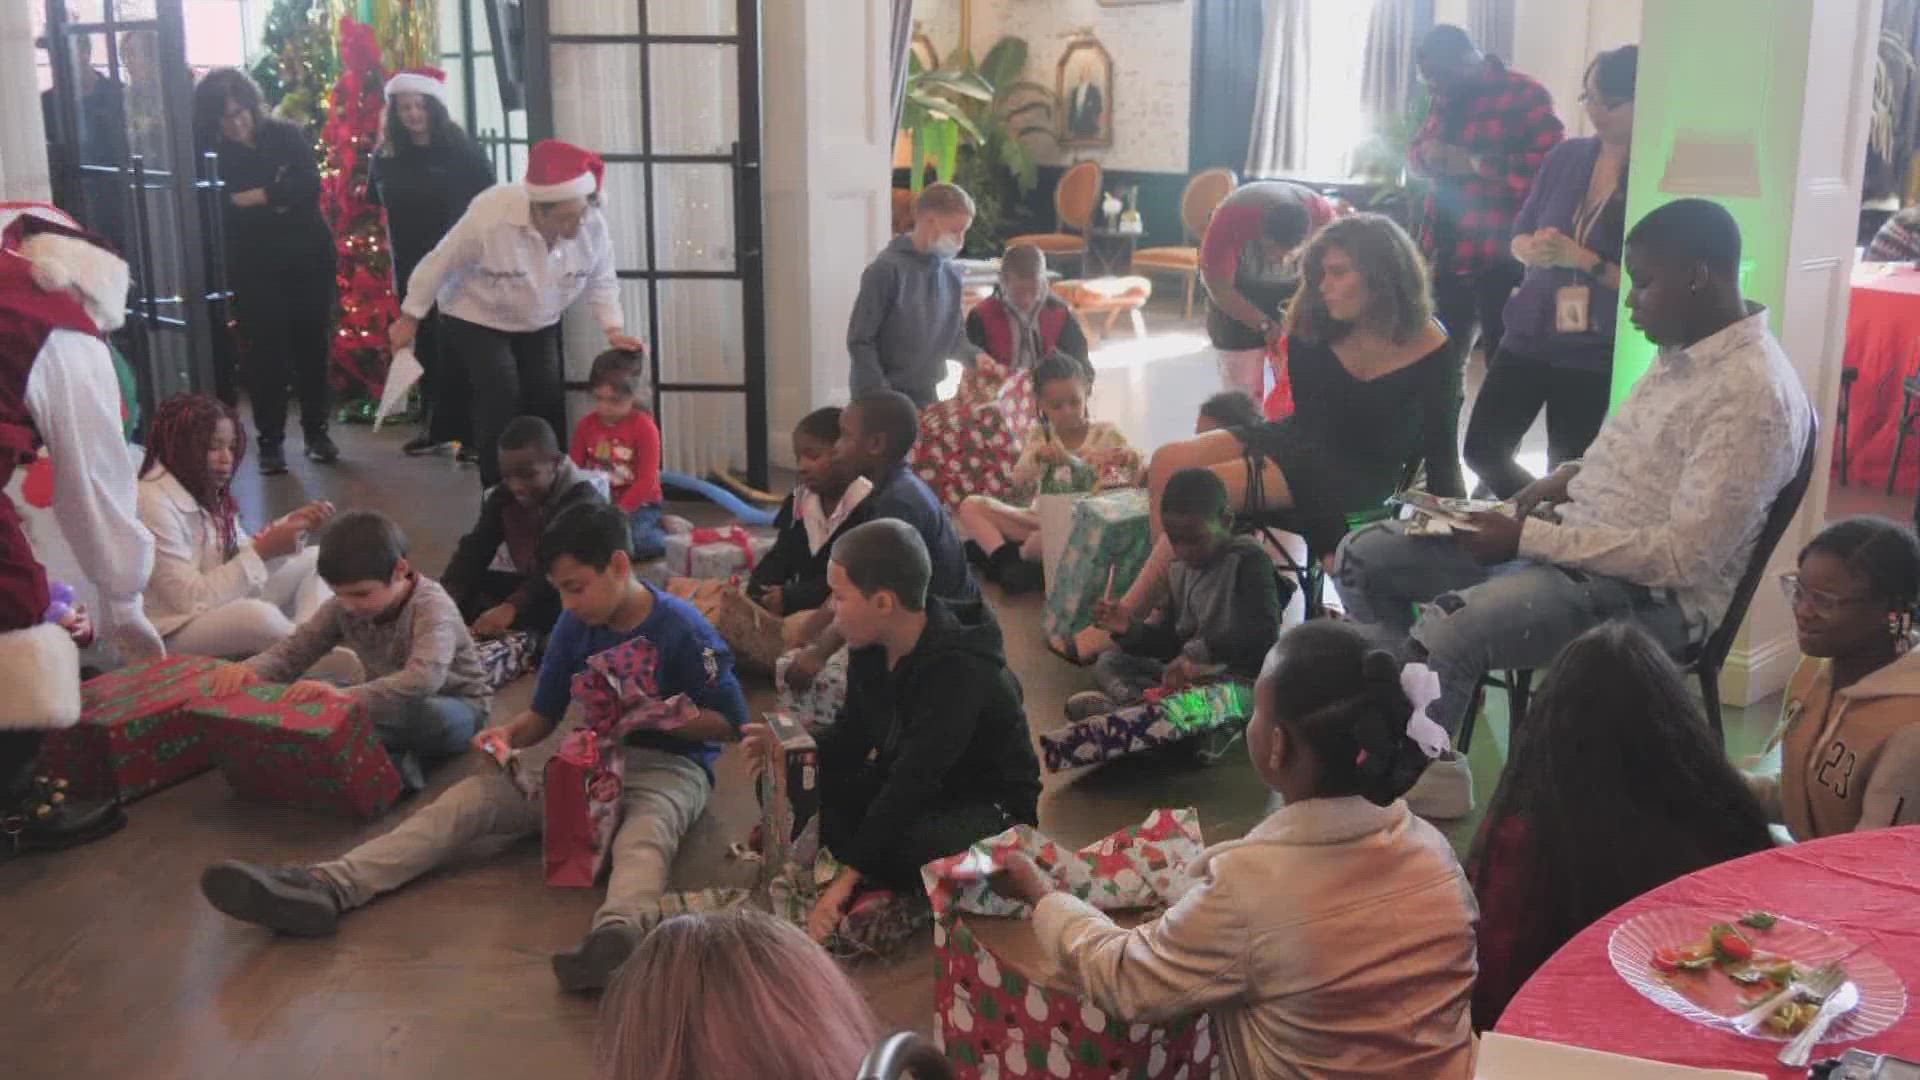 Each year, Dallas World Aquarium workers purchase gifts for children in foster care and Santa hands them all out